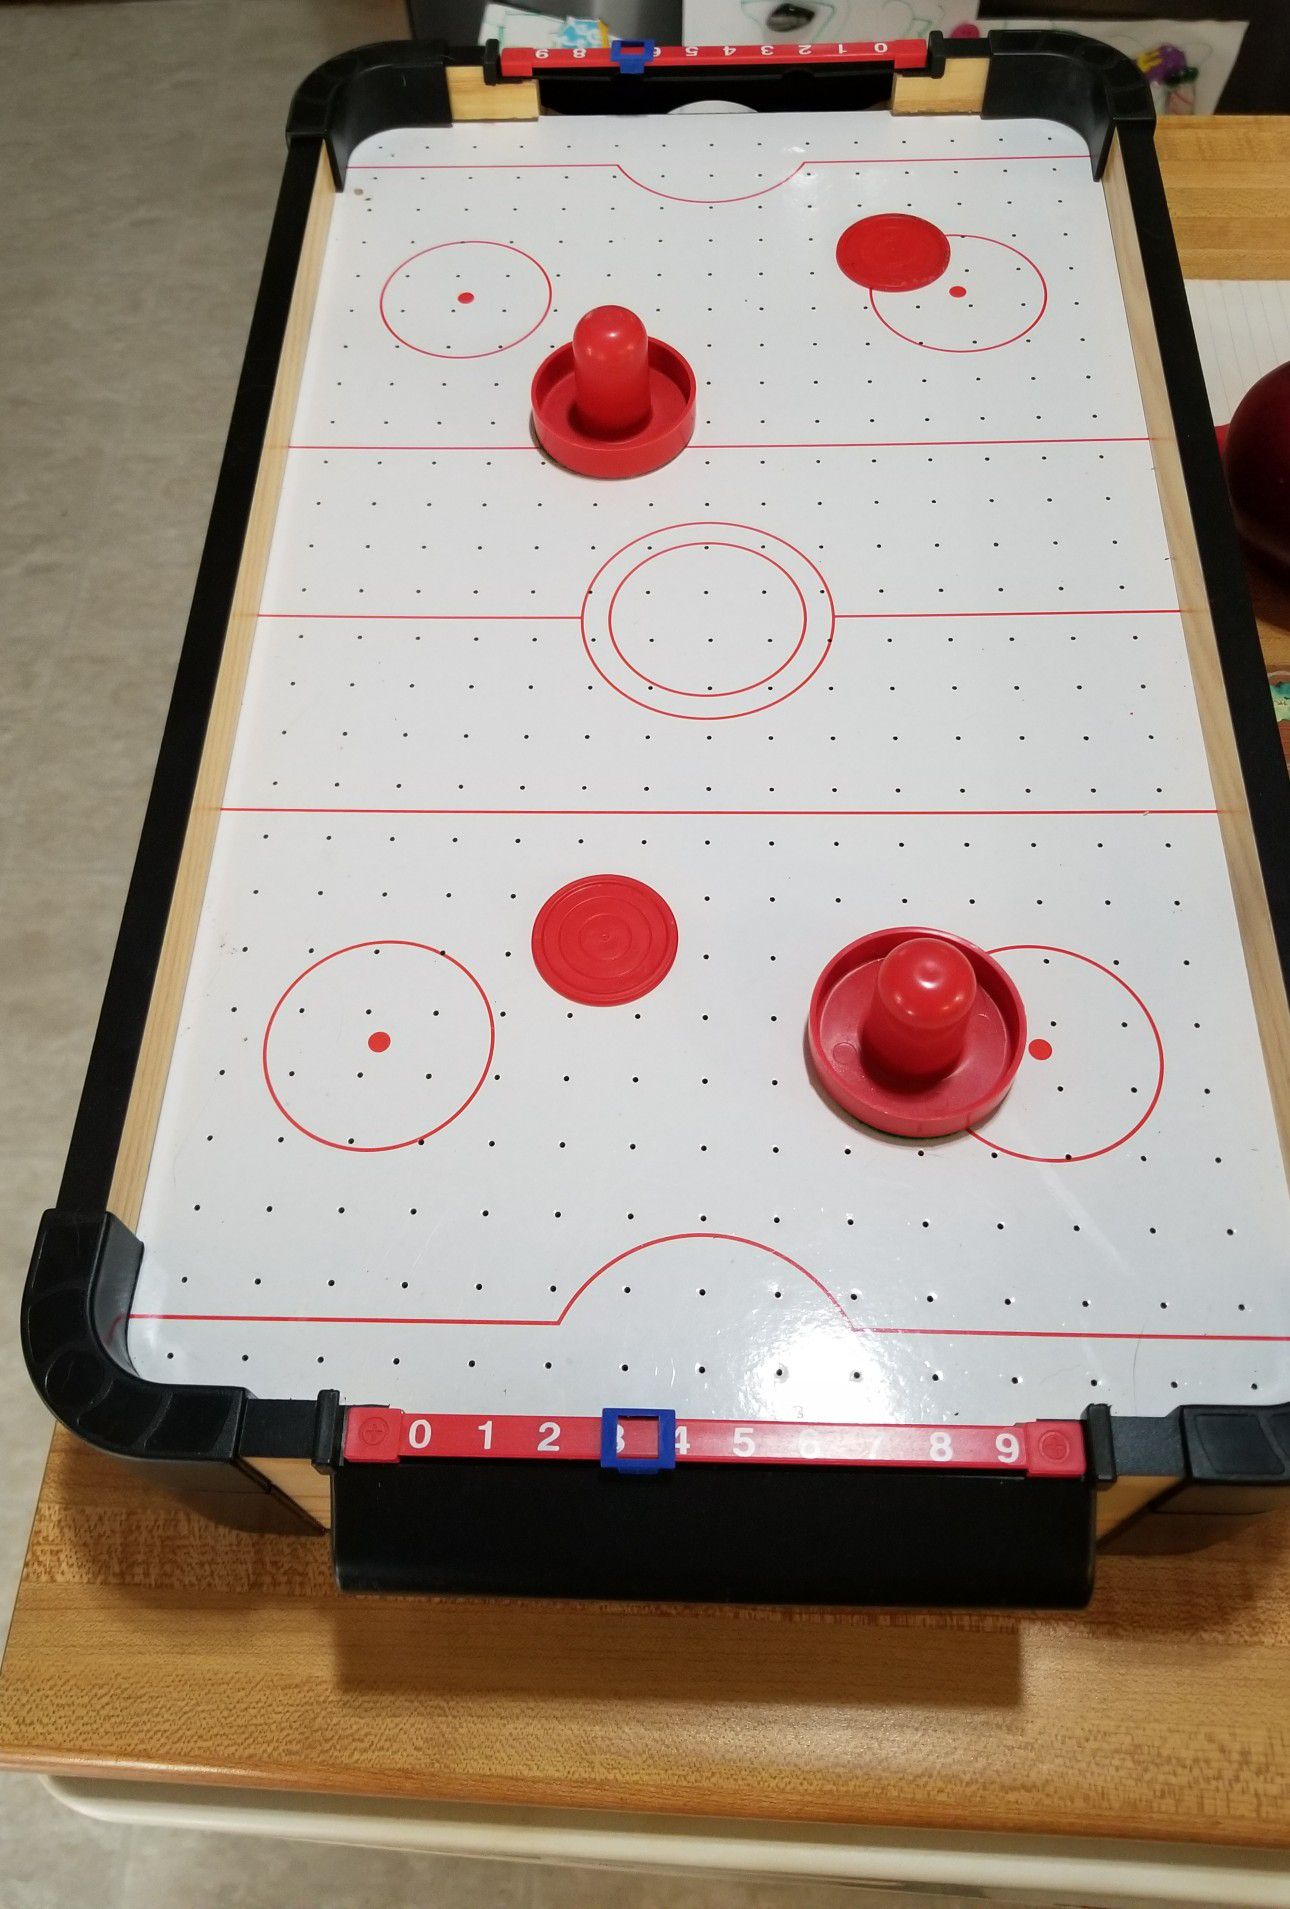 Battery operated table top air hockey game